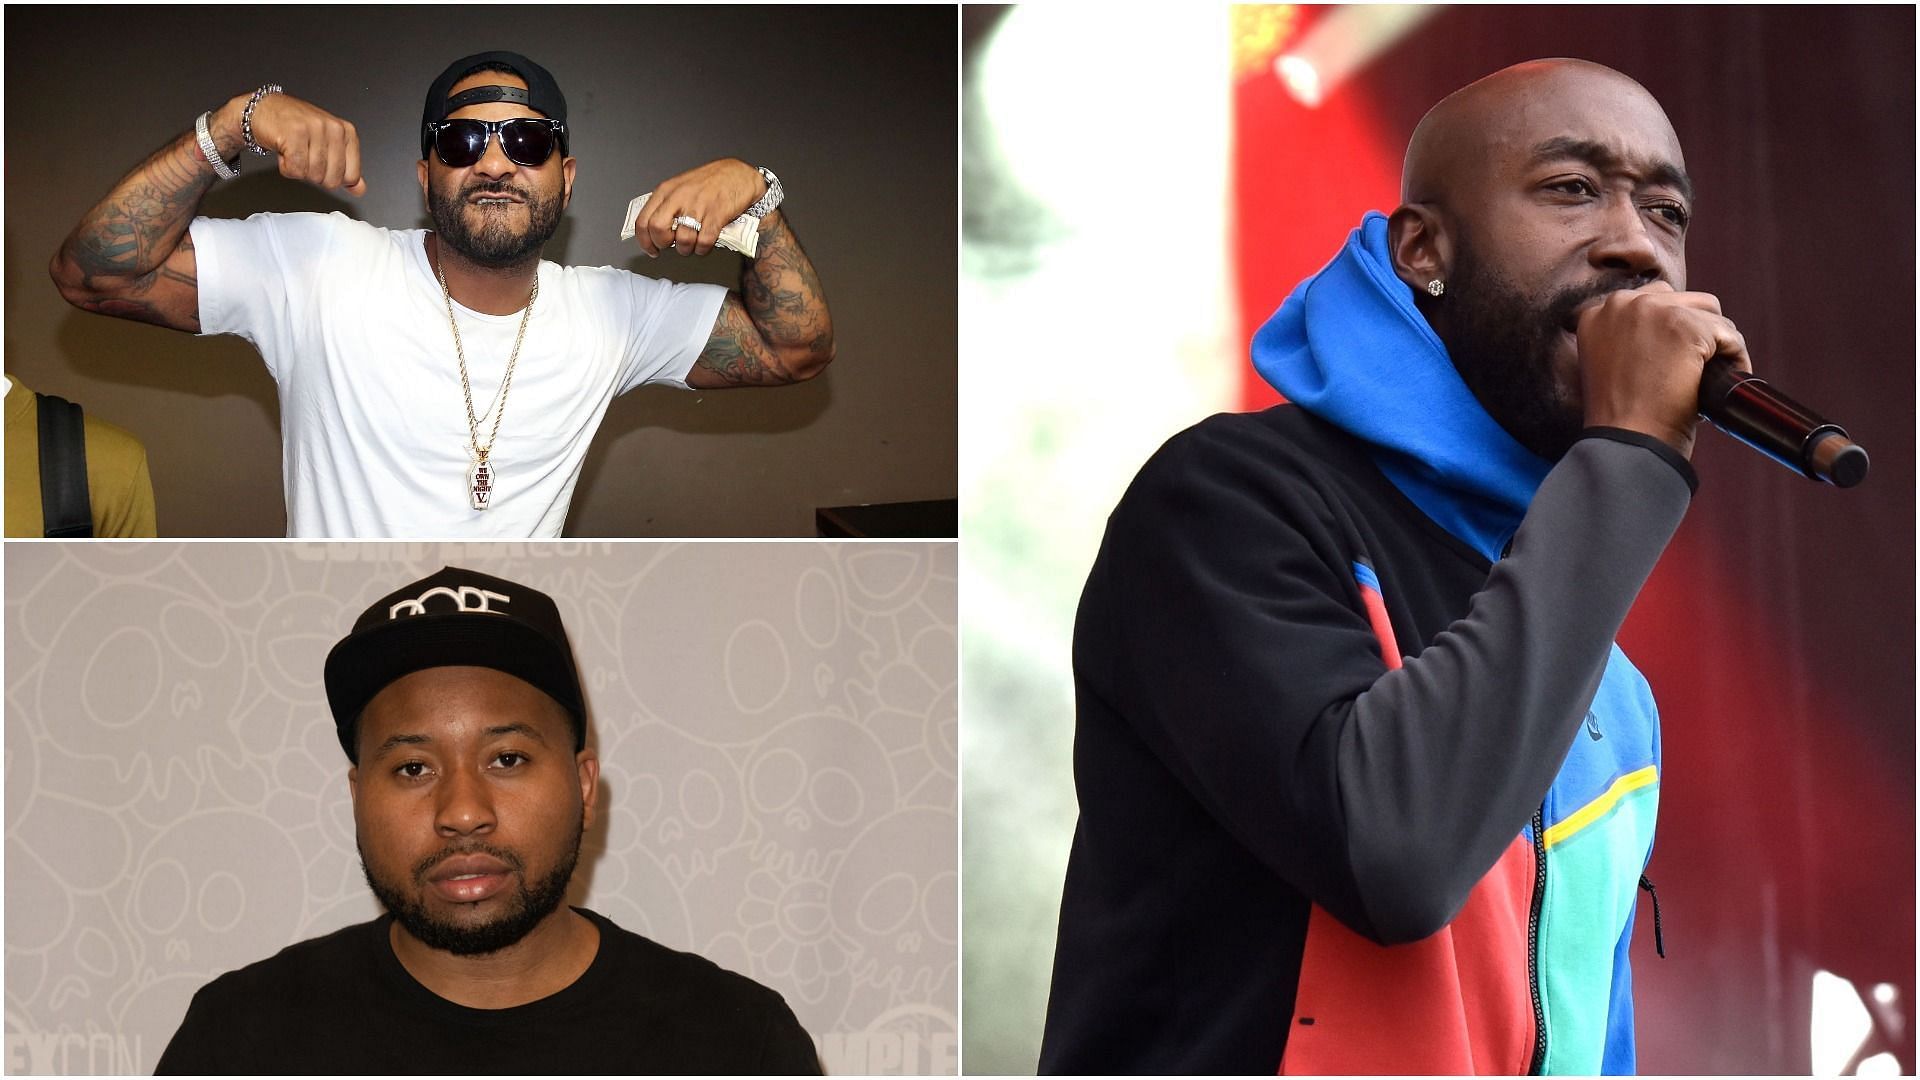 Freddie Gibbs is already a rival of Jim Jones and Akademiks (Images by Tim Mosenfelder, Johnny Nunez and Earl Gibson III via Getty Images)